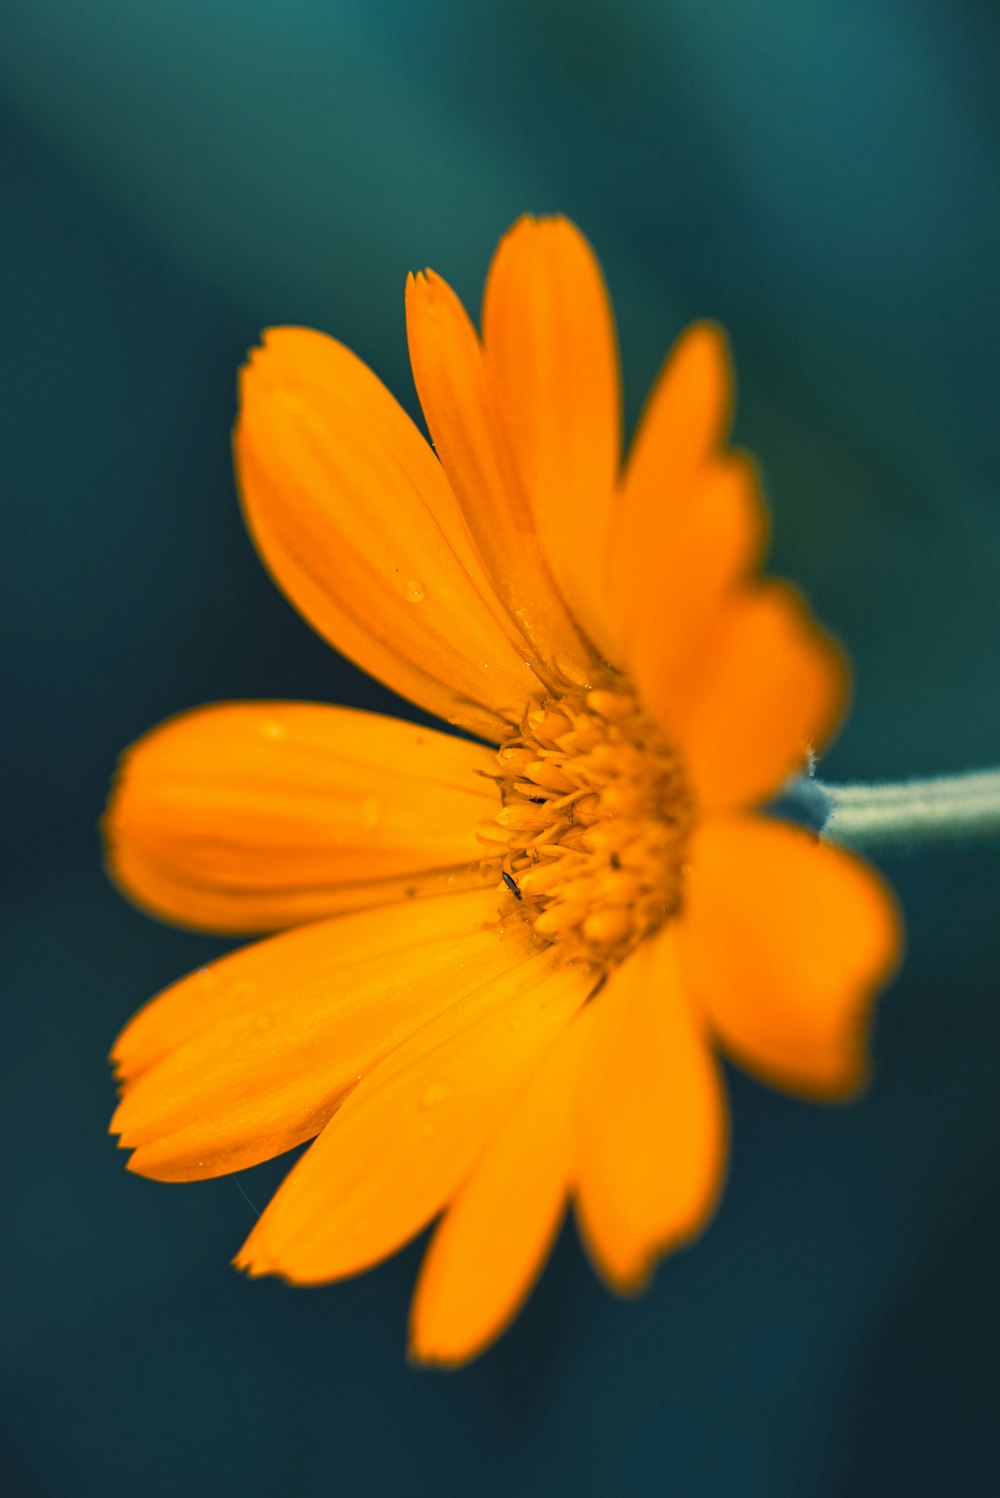 a close up of a yellow flower with water droplets on it